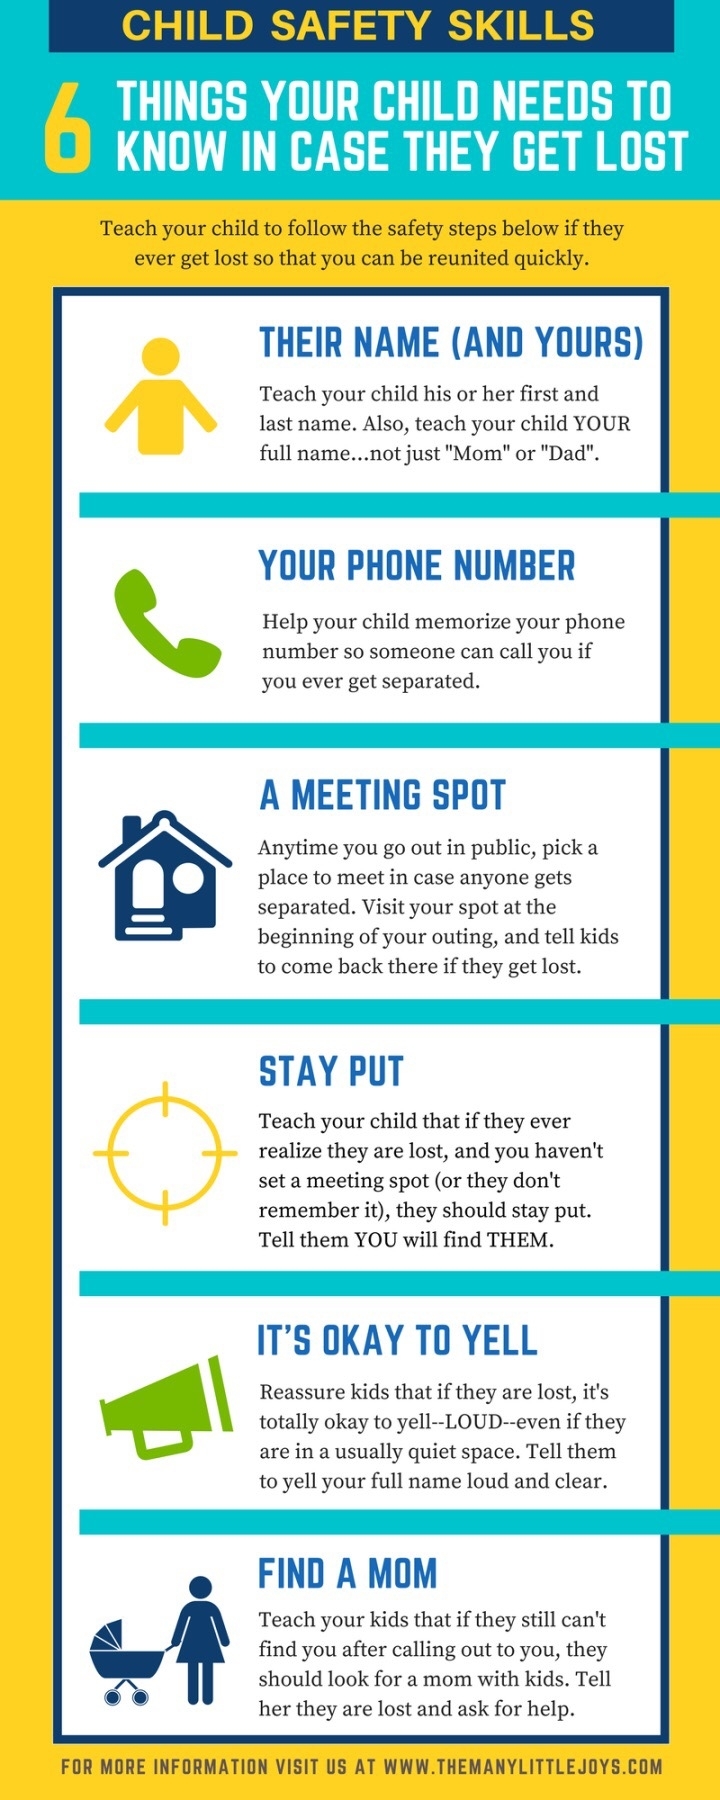 6 Things Your Child Needs to Know in Case They Get Lost: Their name and yours, their phone number, a meeting spot, to stay put, it&#x27;s okay to yell, and find a mom